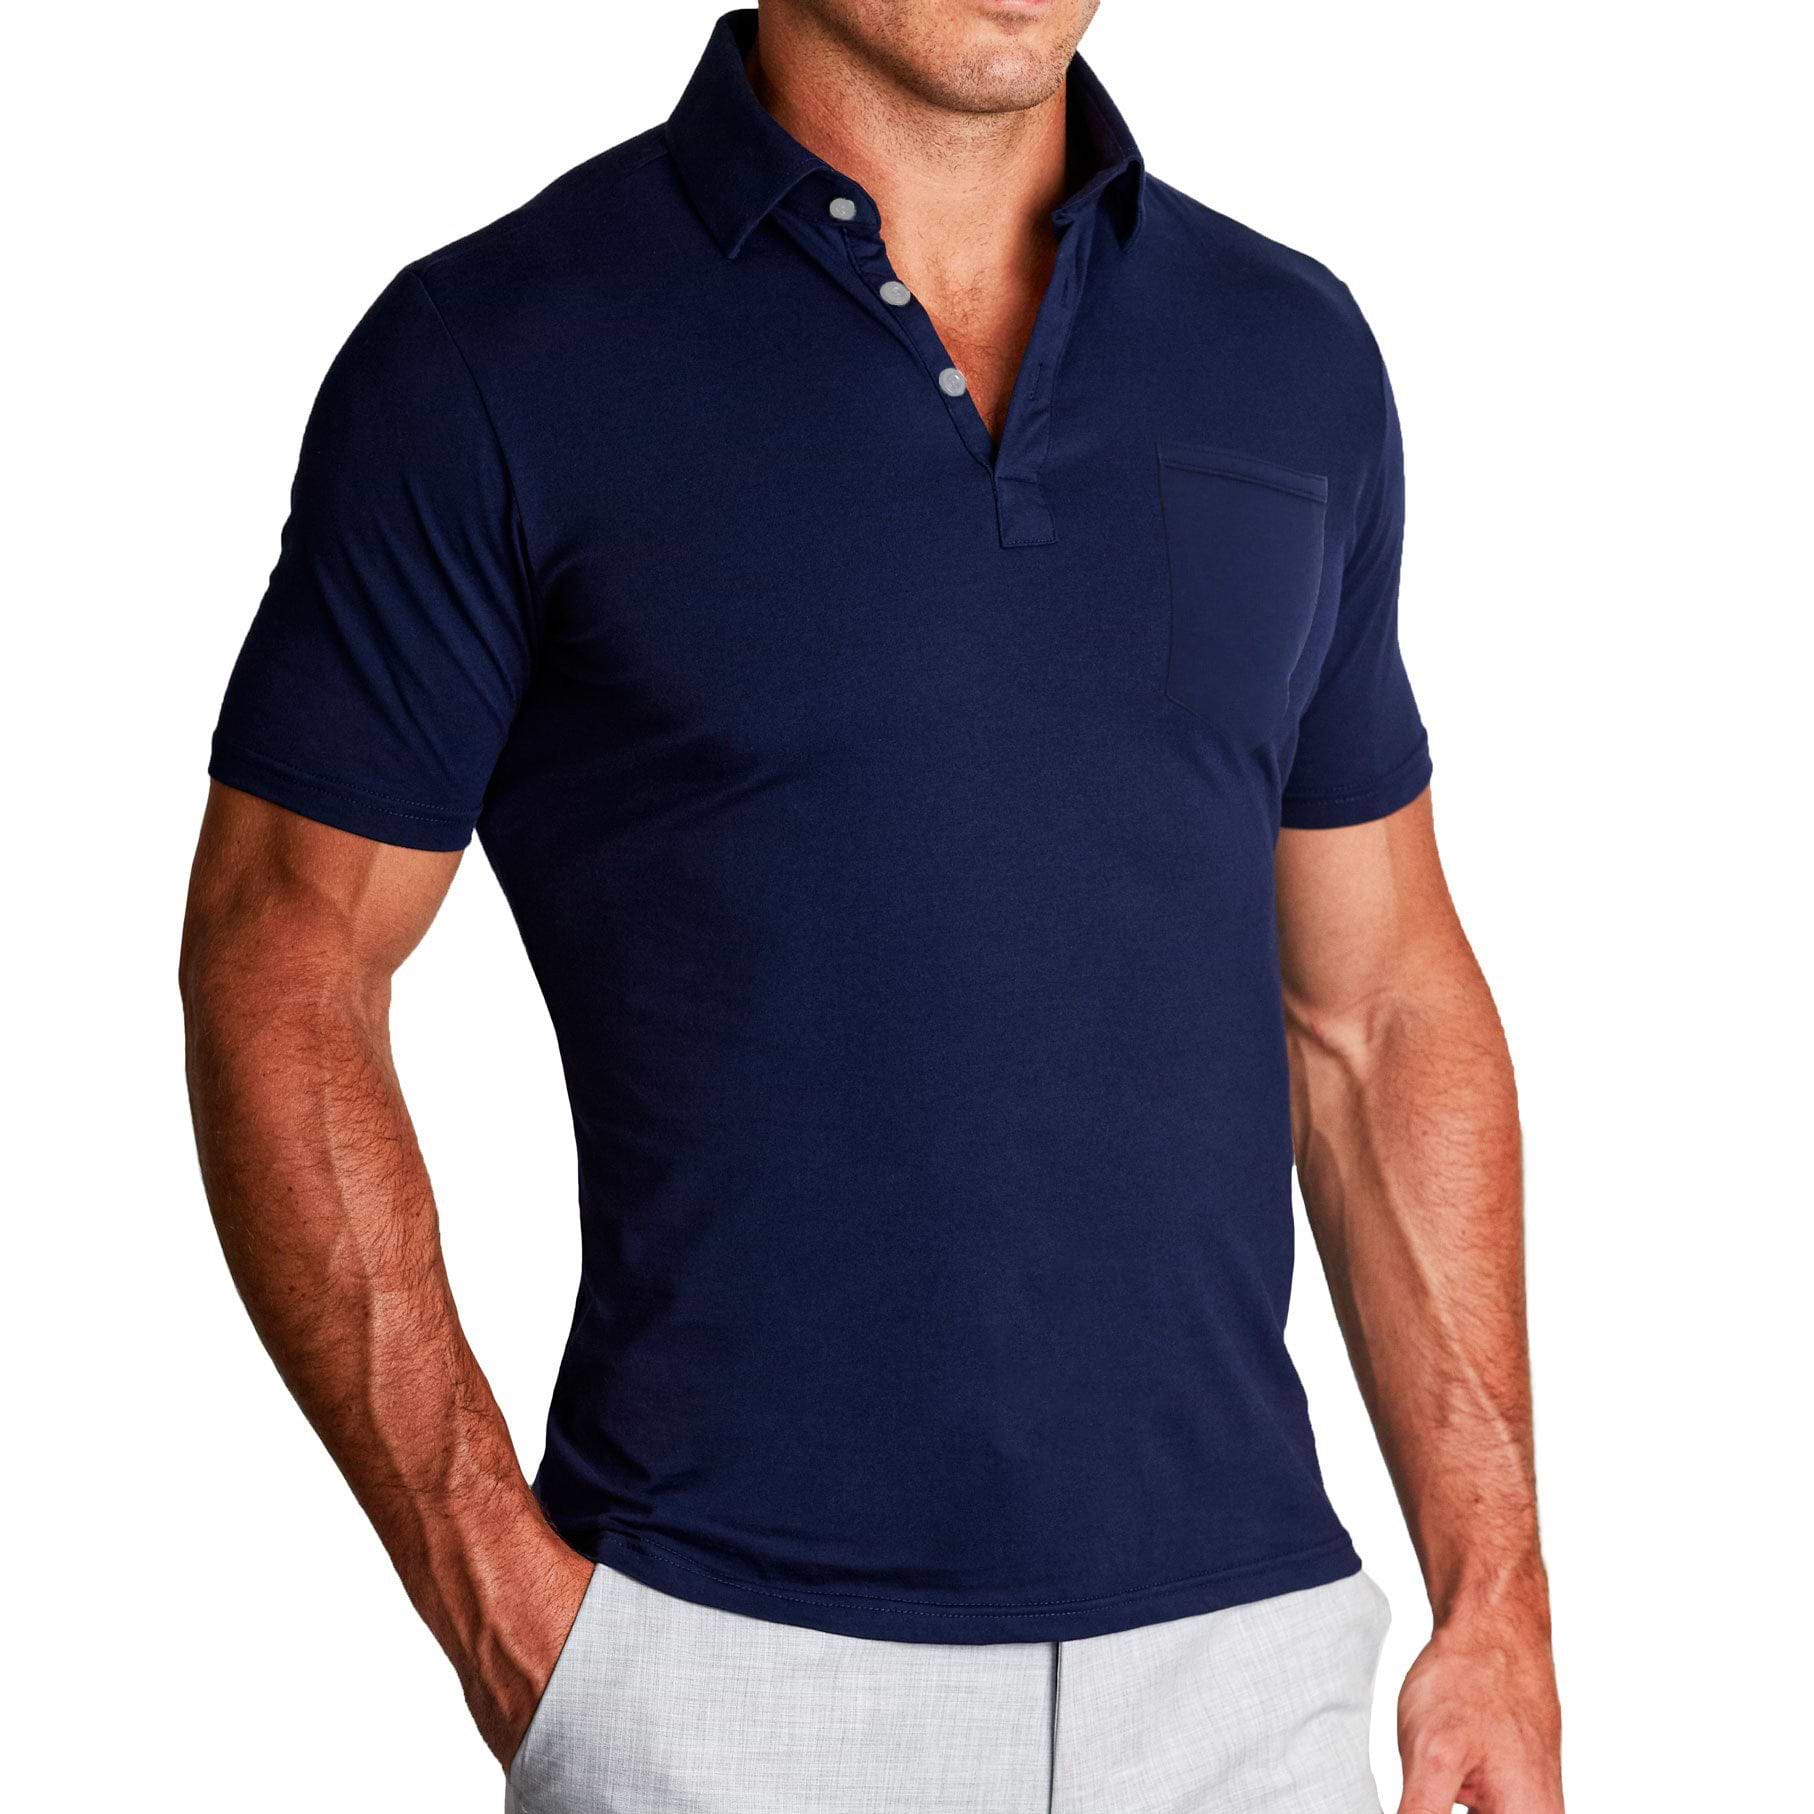 "The Quick" Navy on Navy Polo